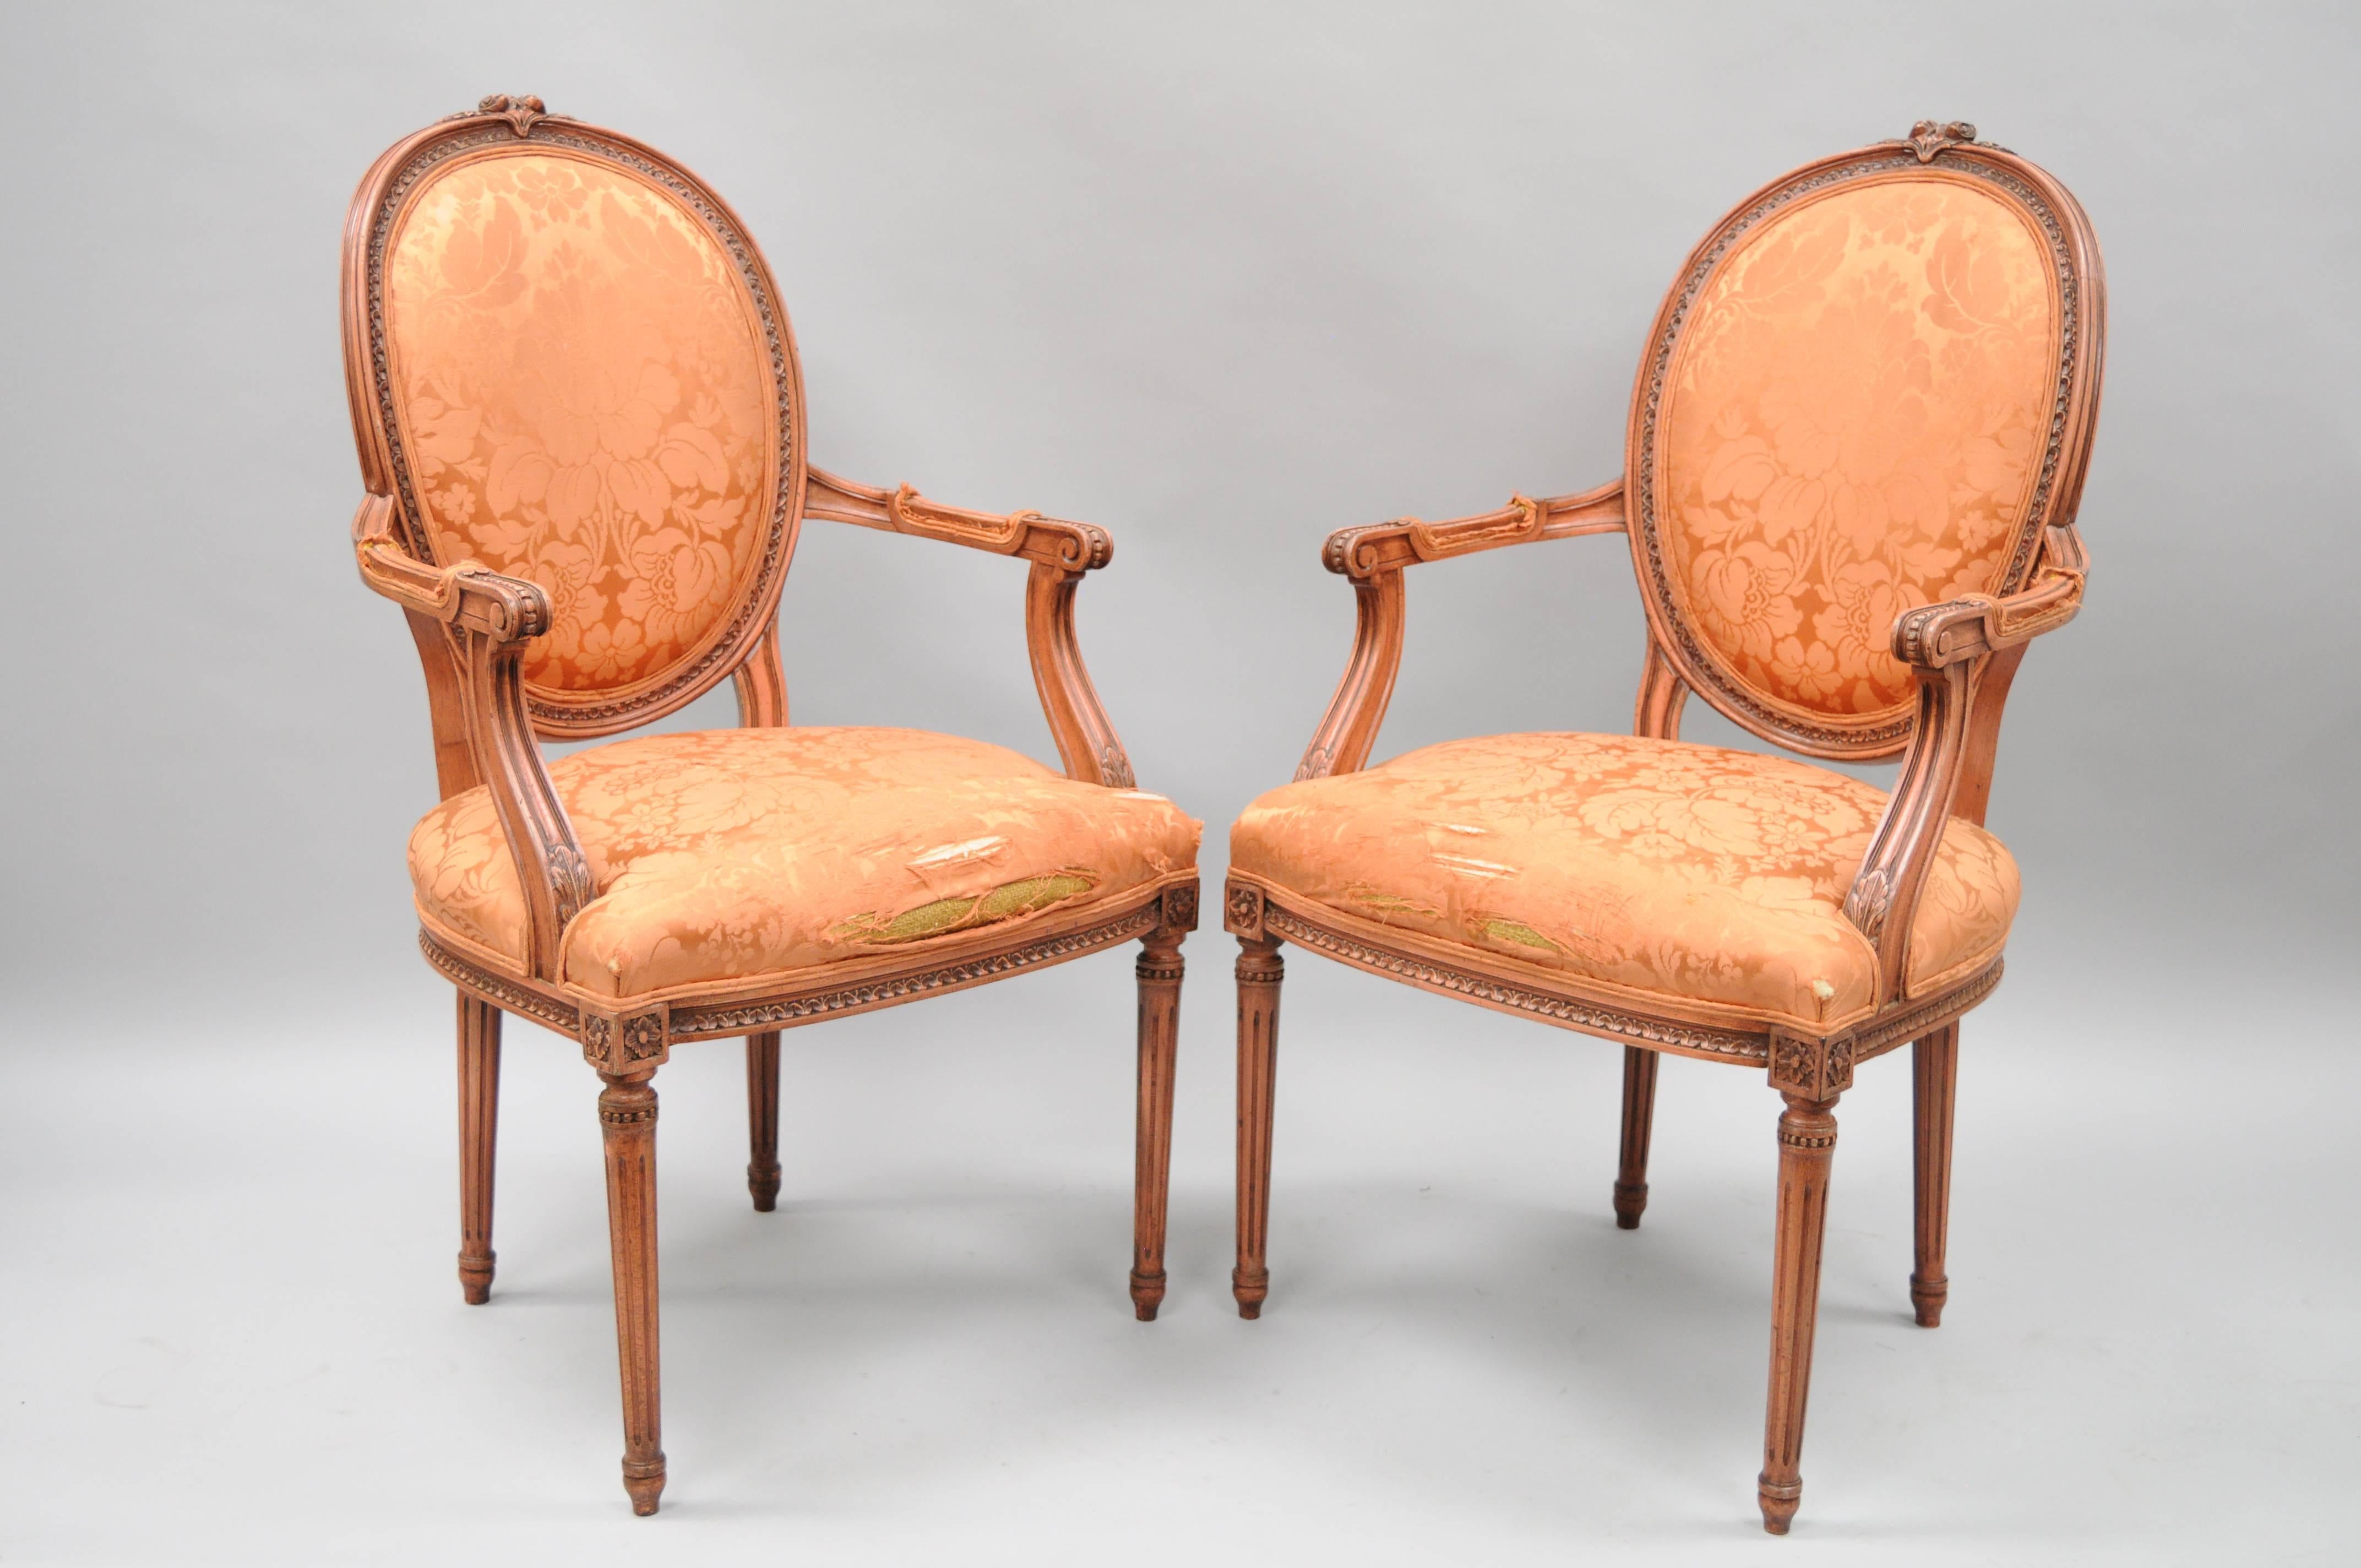 Pair of Vintage French Louis XVI style upholstered oval / medallion back dining armchairs with pink distress painted finish. Item features solid carved wood frames, oval backs with floral carved crest, upholstered armrests, reed carved and tapered